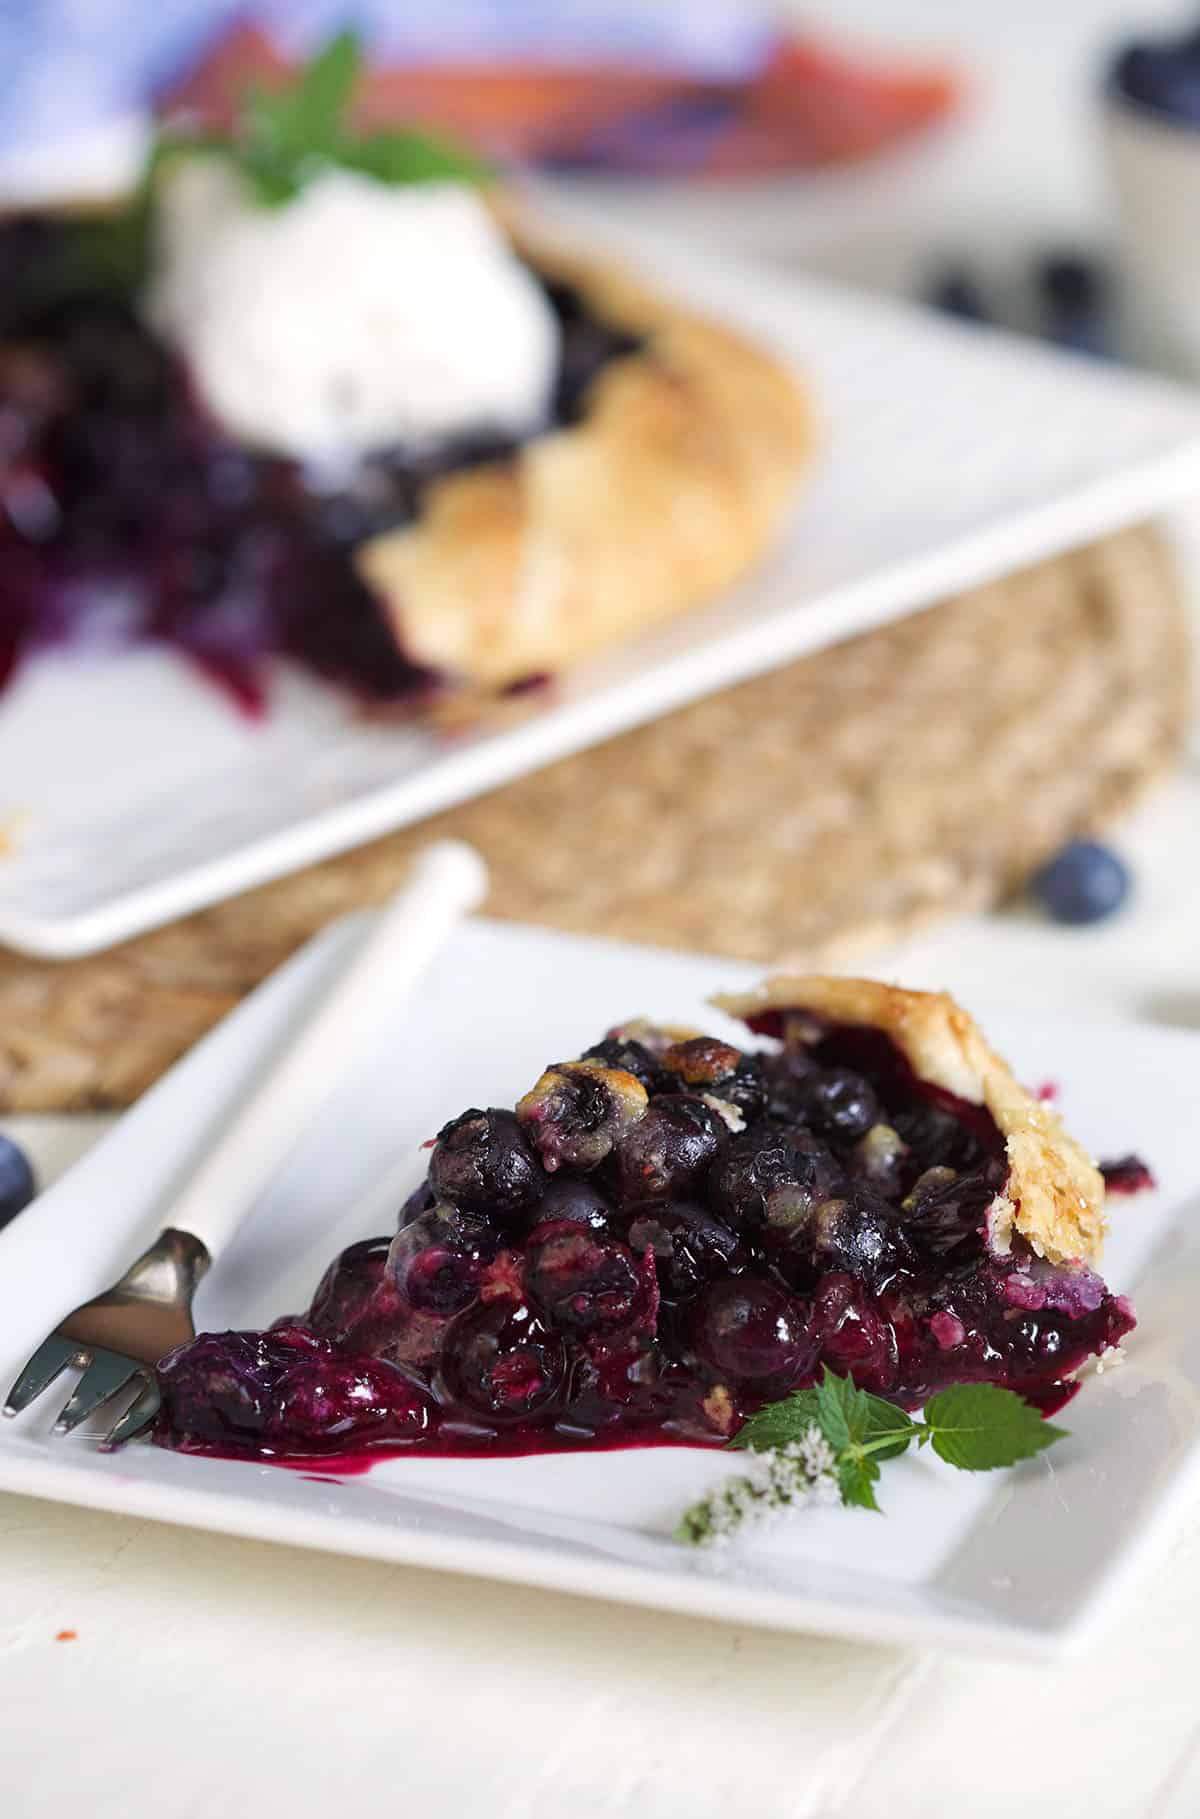 Slice of blueberry galette on a white plate